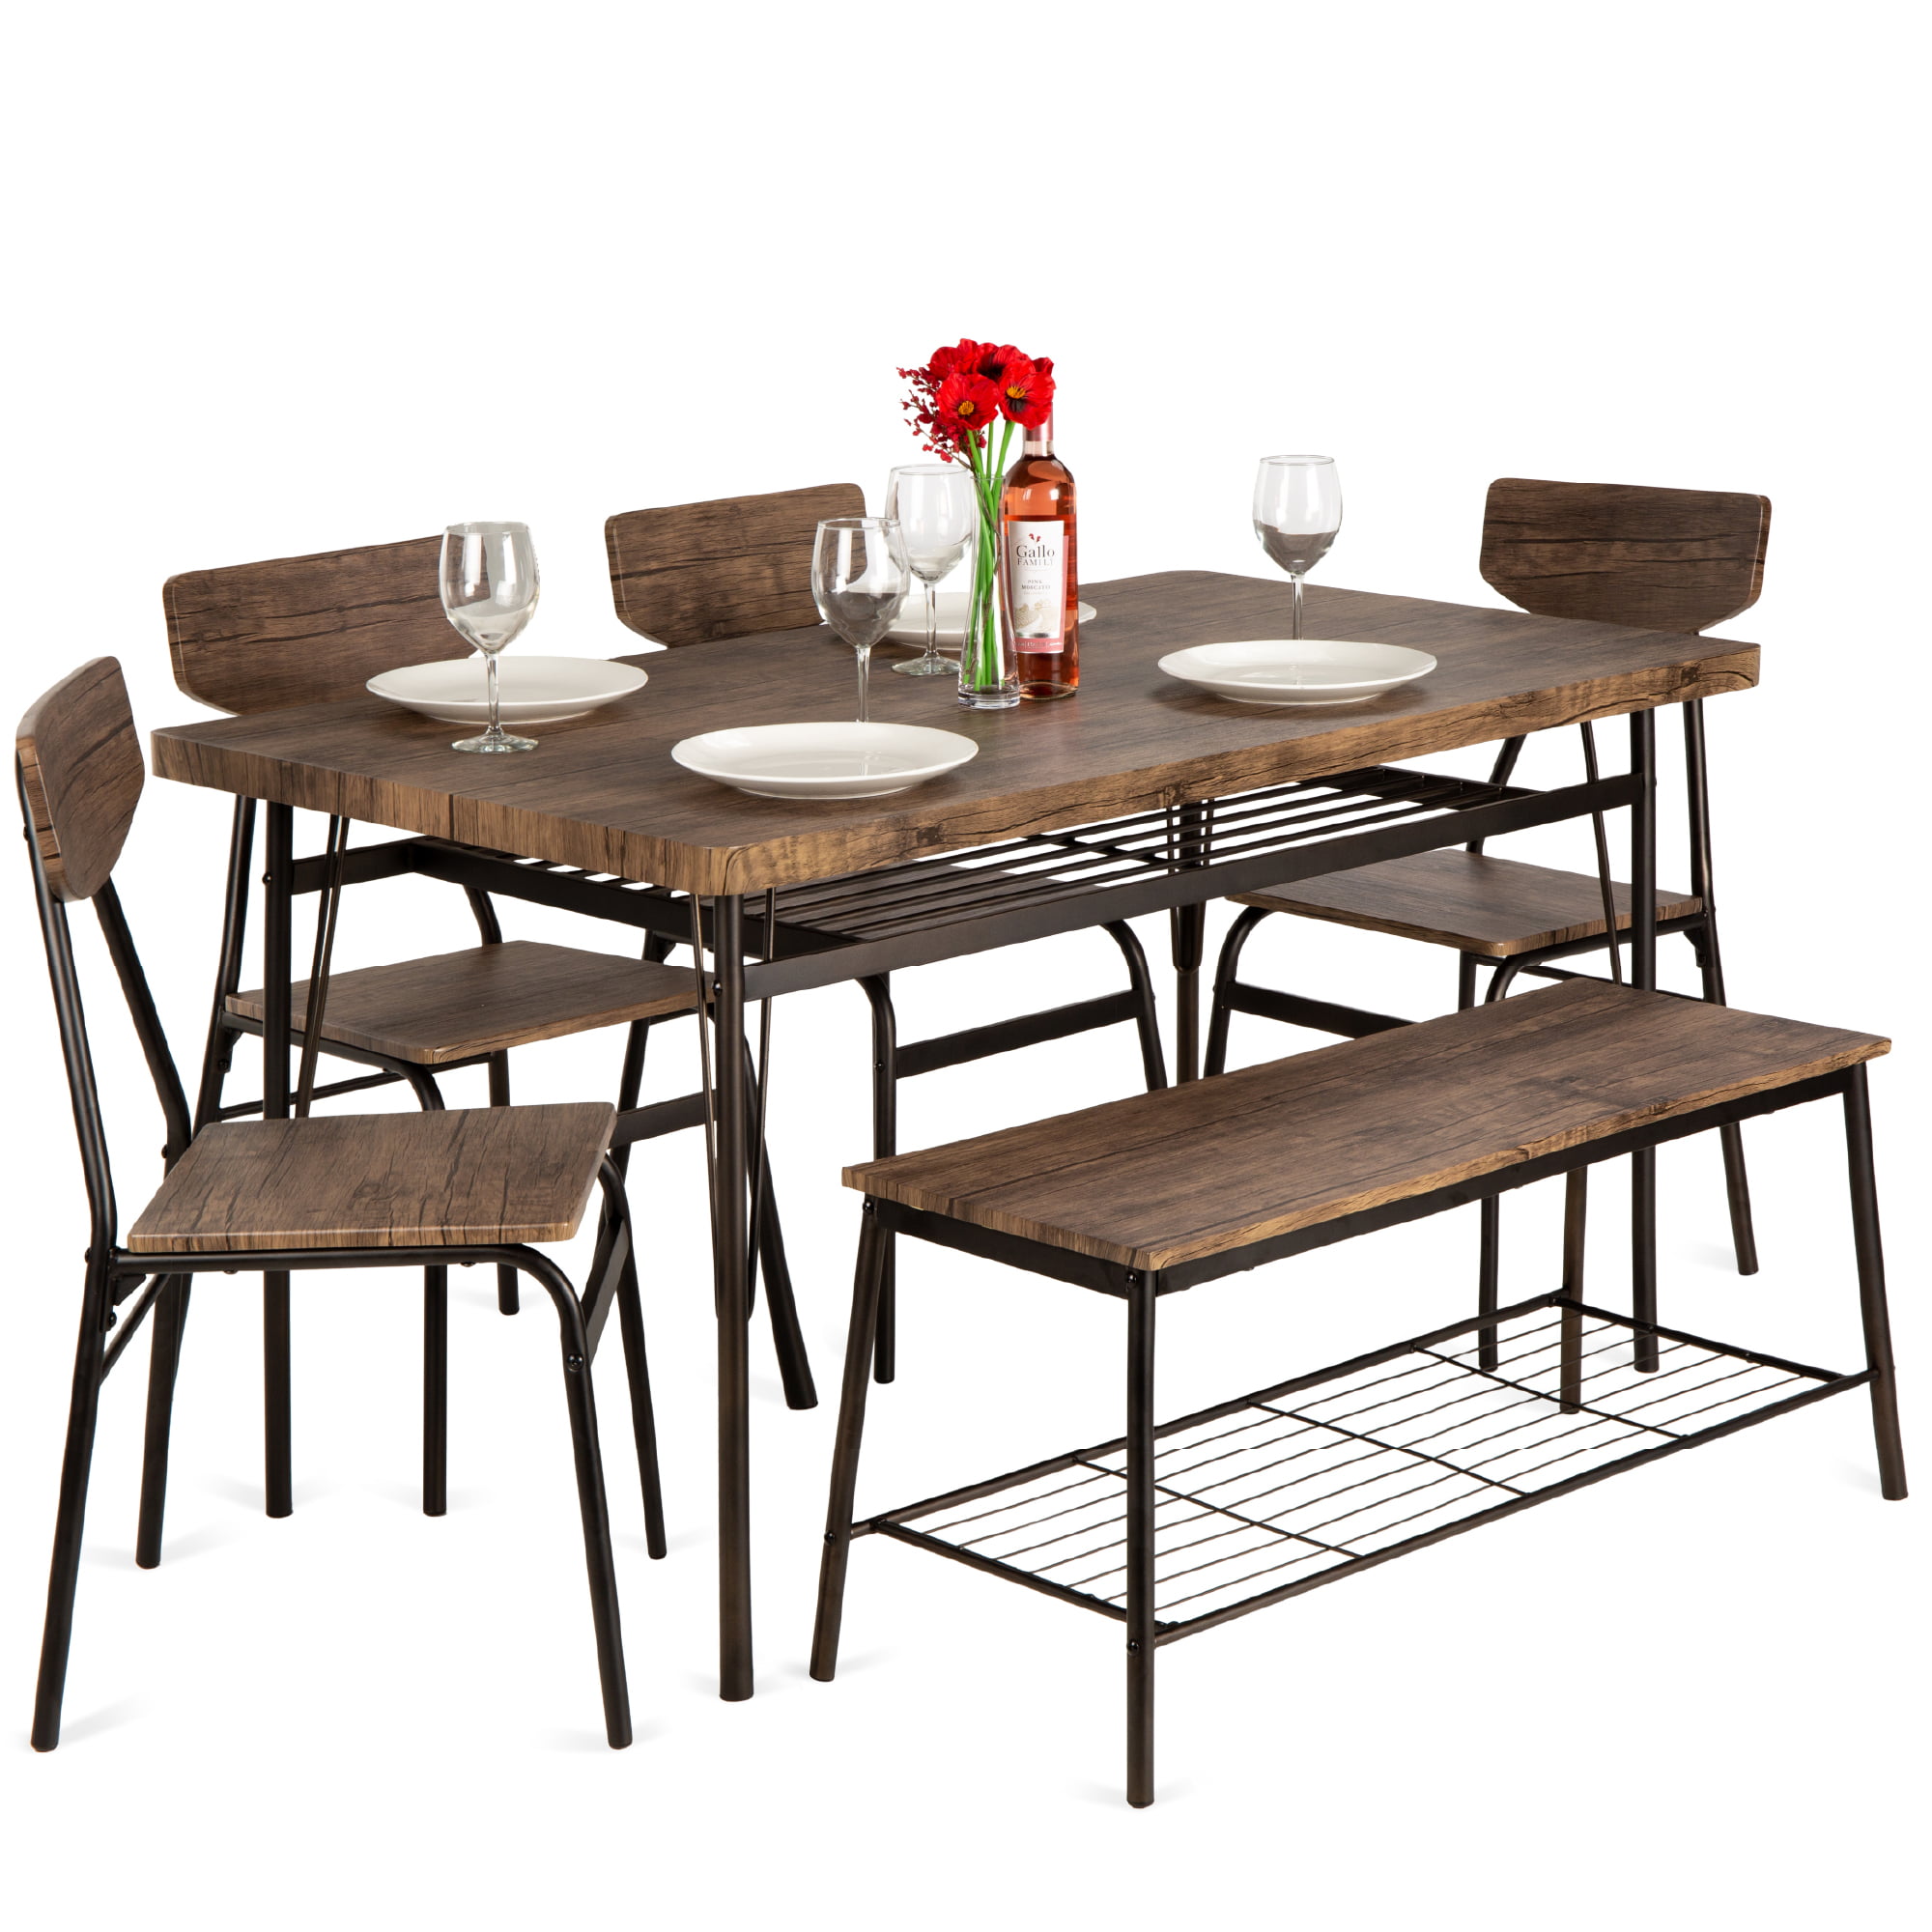 All Fraction Ministry Best Choice Products 6-Piece 55in Modern Home Dining Set w/ Storage Racks,  Rectangular Table, Bench, 4 Chairs - Brown - Walmart.com